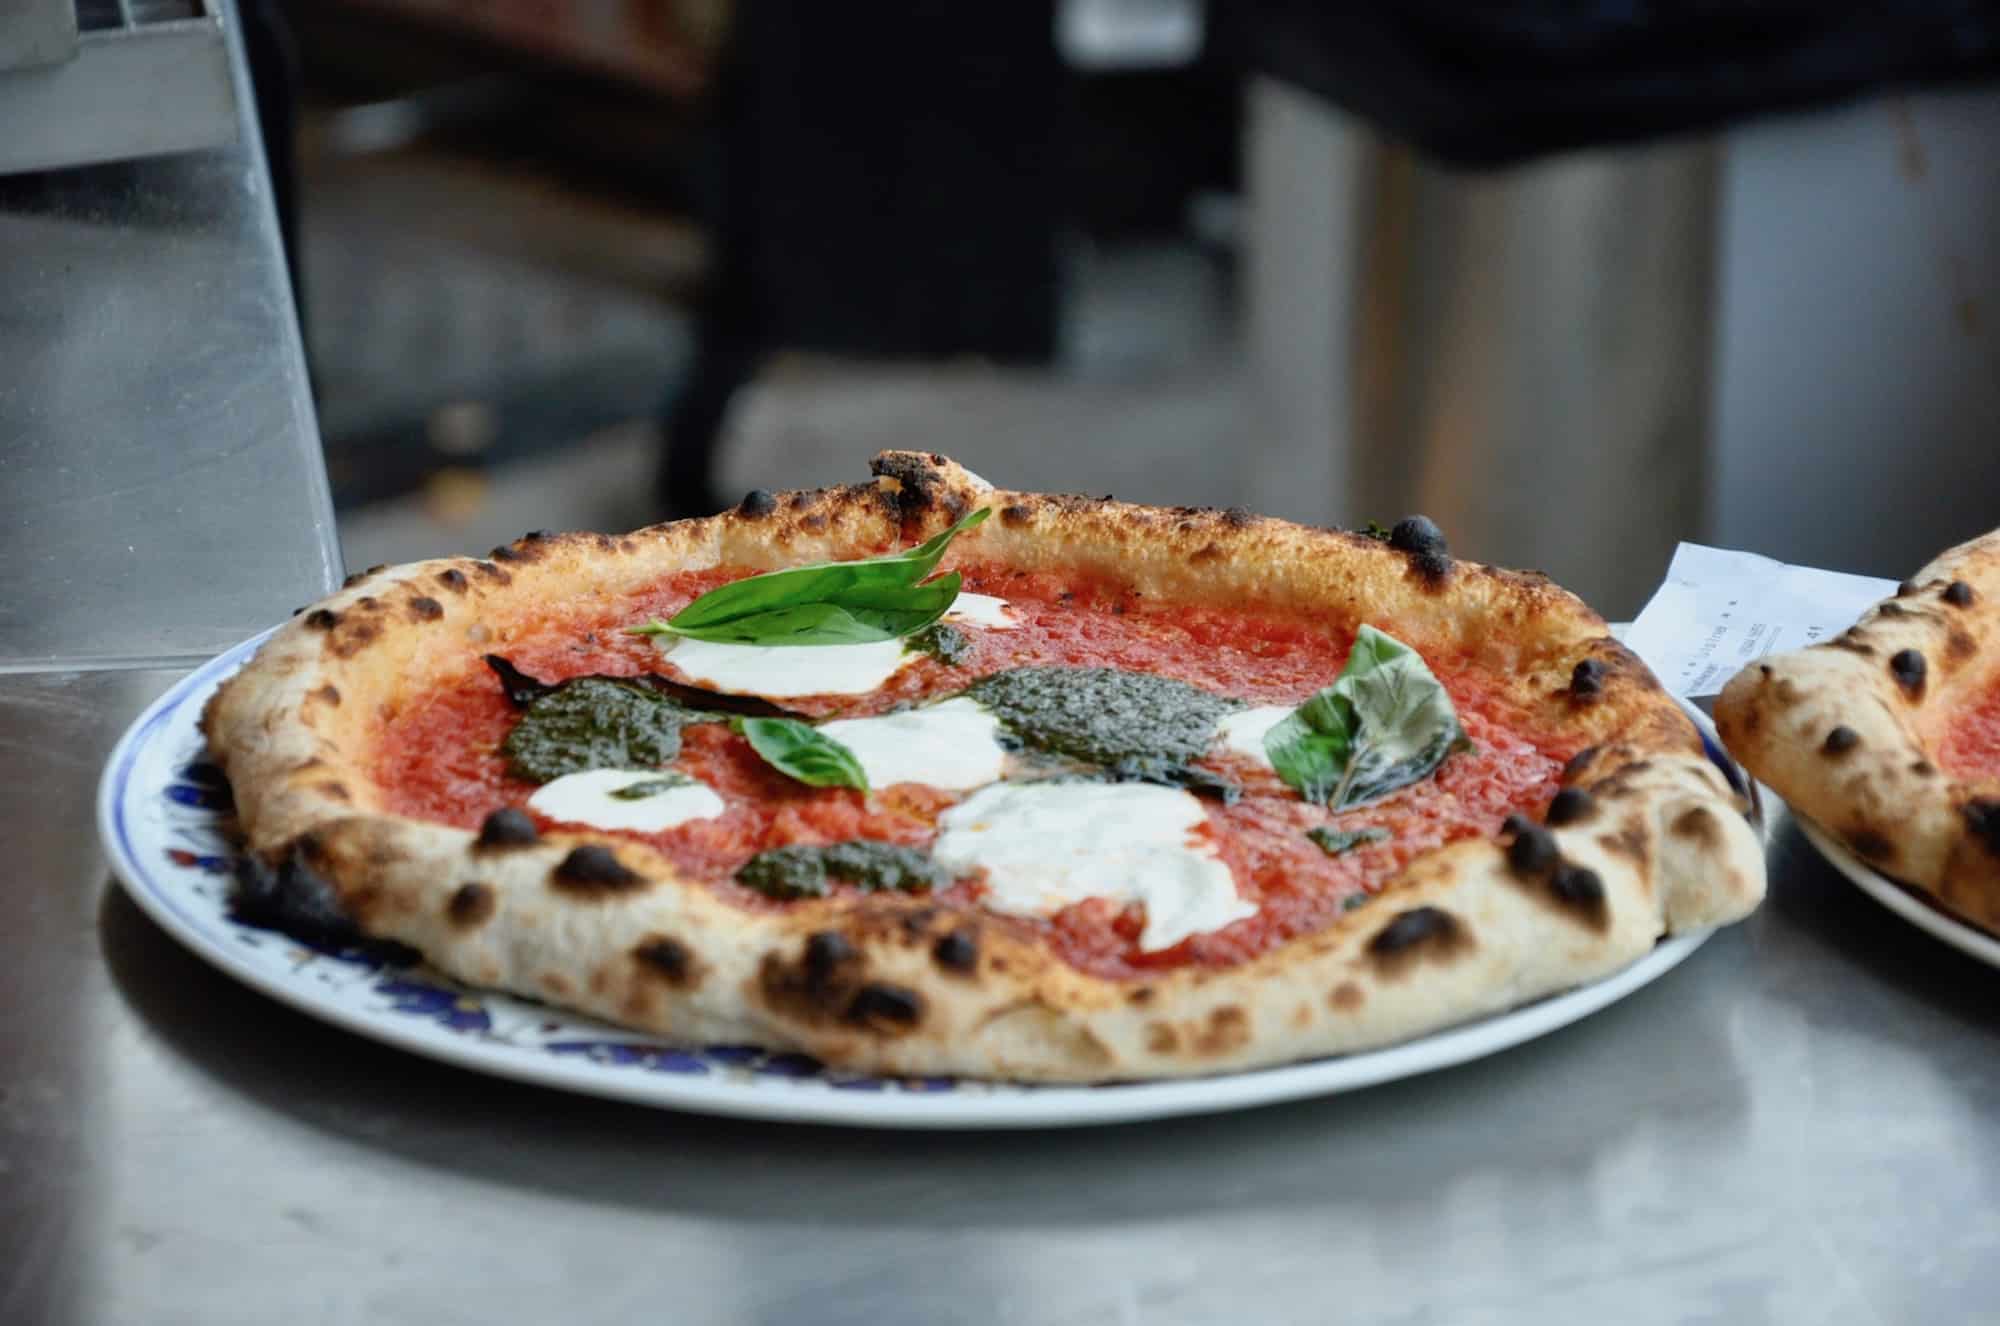 Paris restaurant, Big Mamma Group's La Felicita, serves delicious stone-baked pizza and our favorite is the mozzarella and basil.